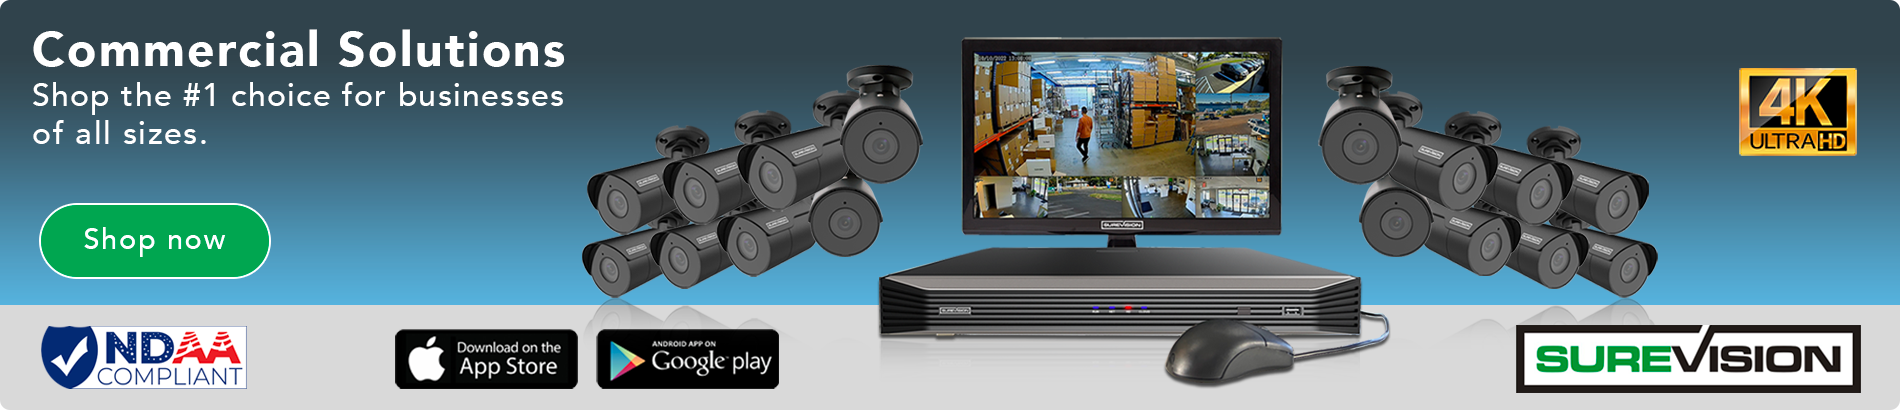 Security Camera Systems | Business - Commercial